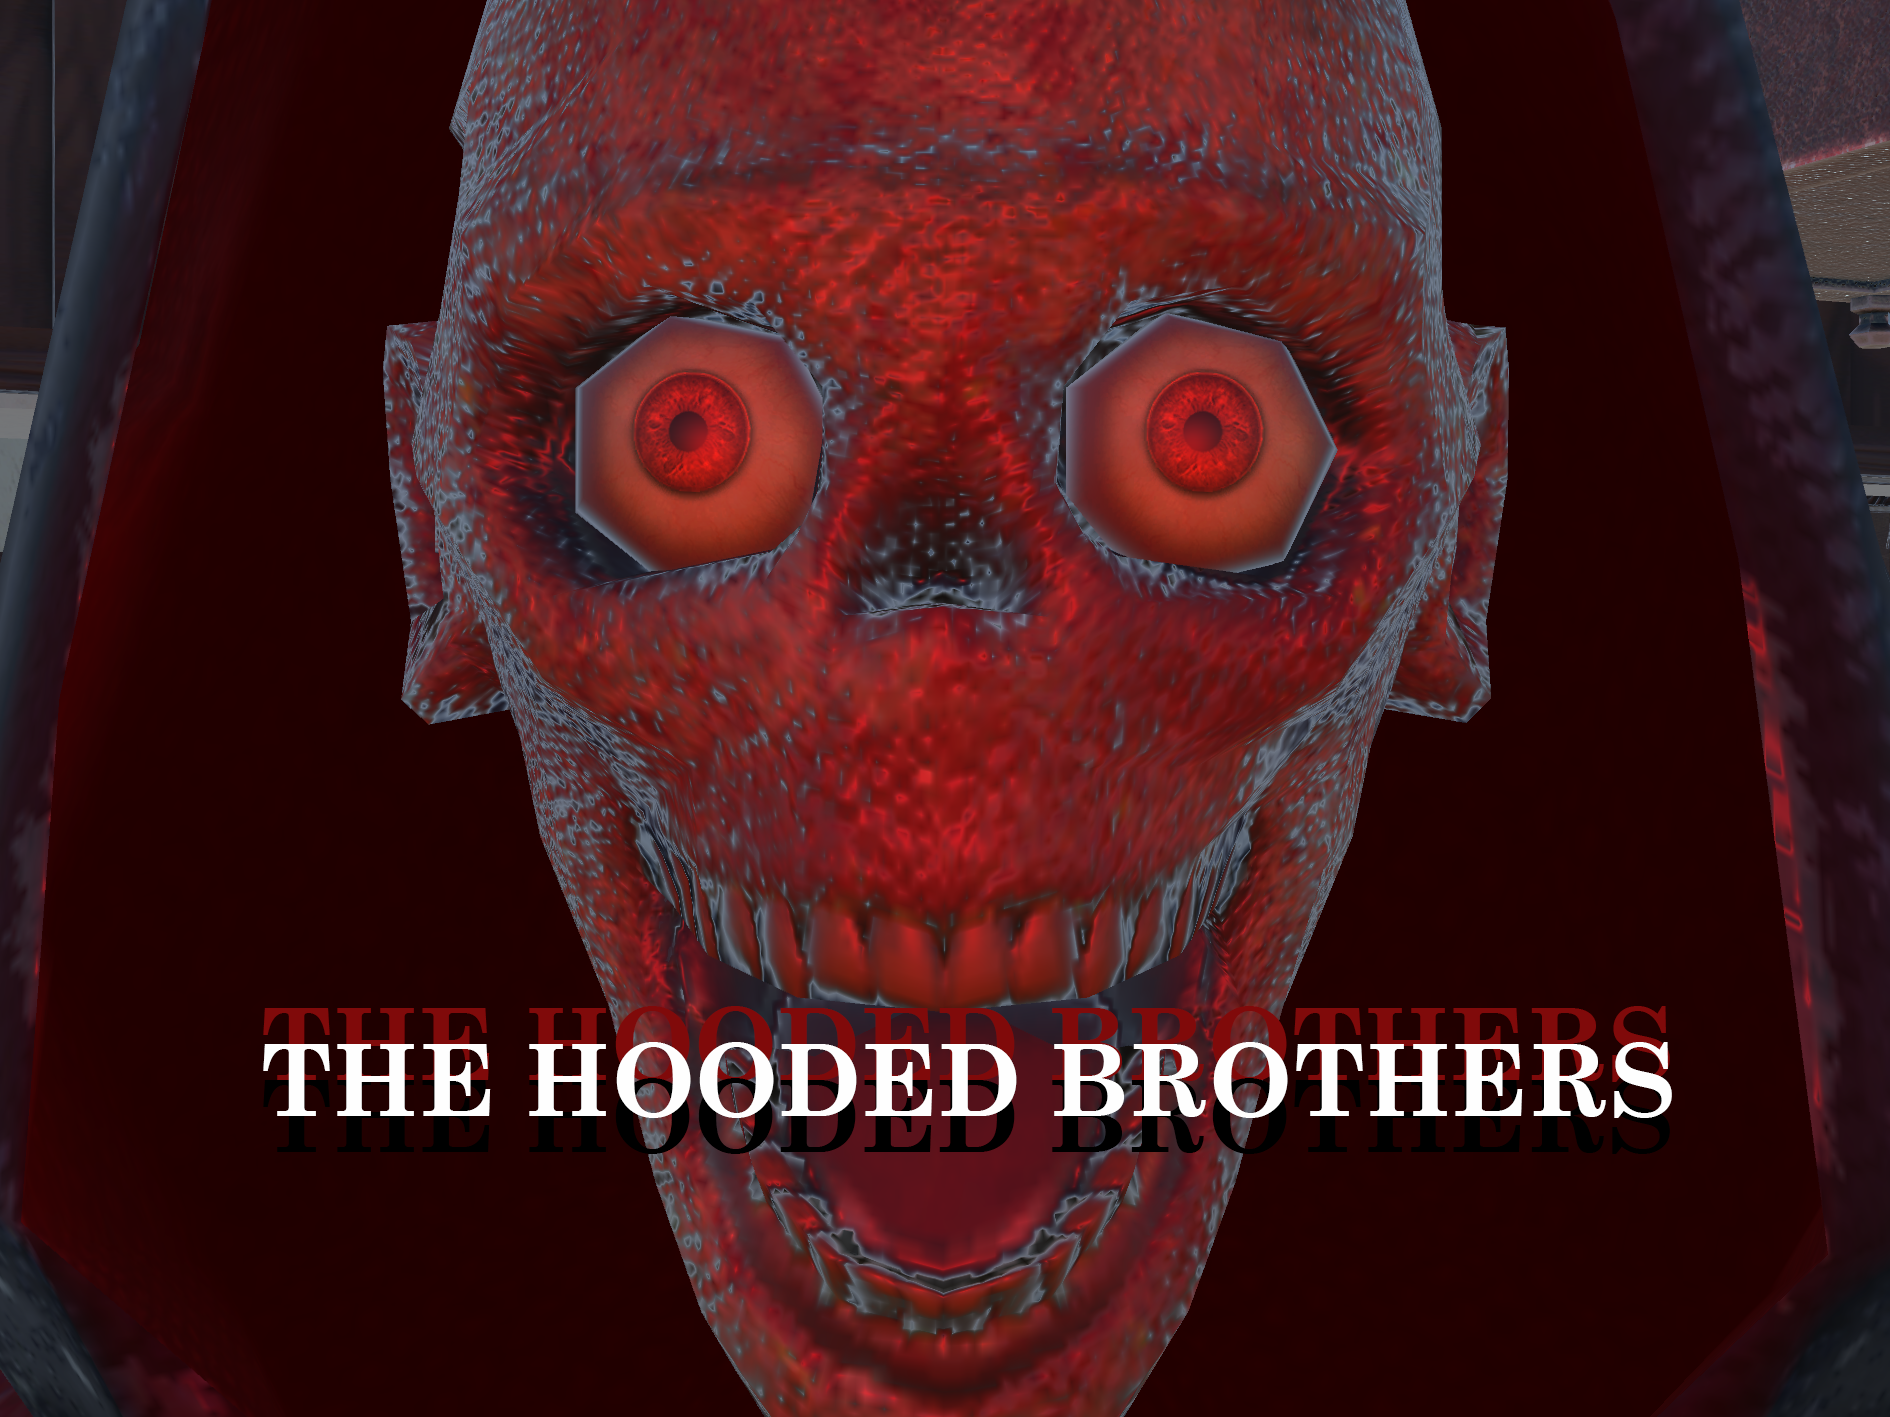 The Hooded Brothers